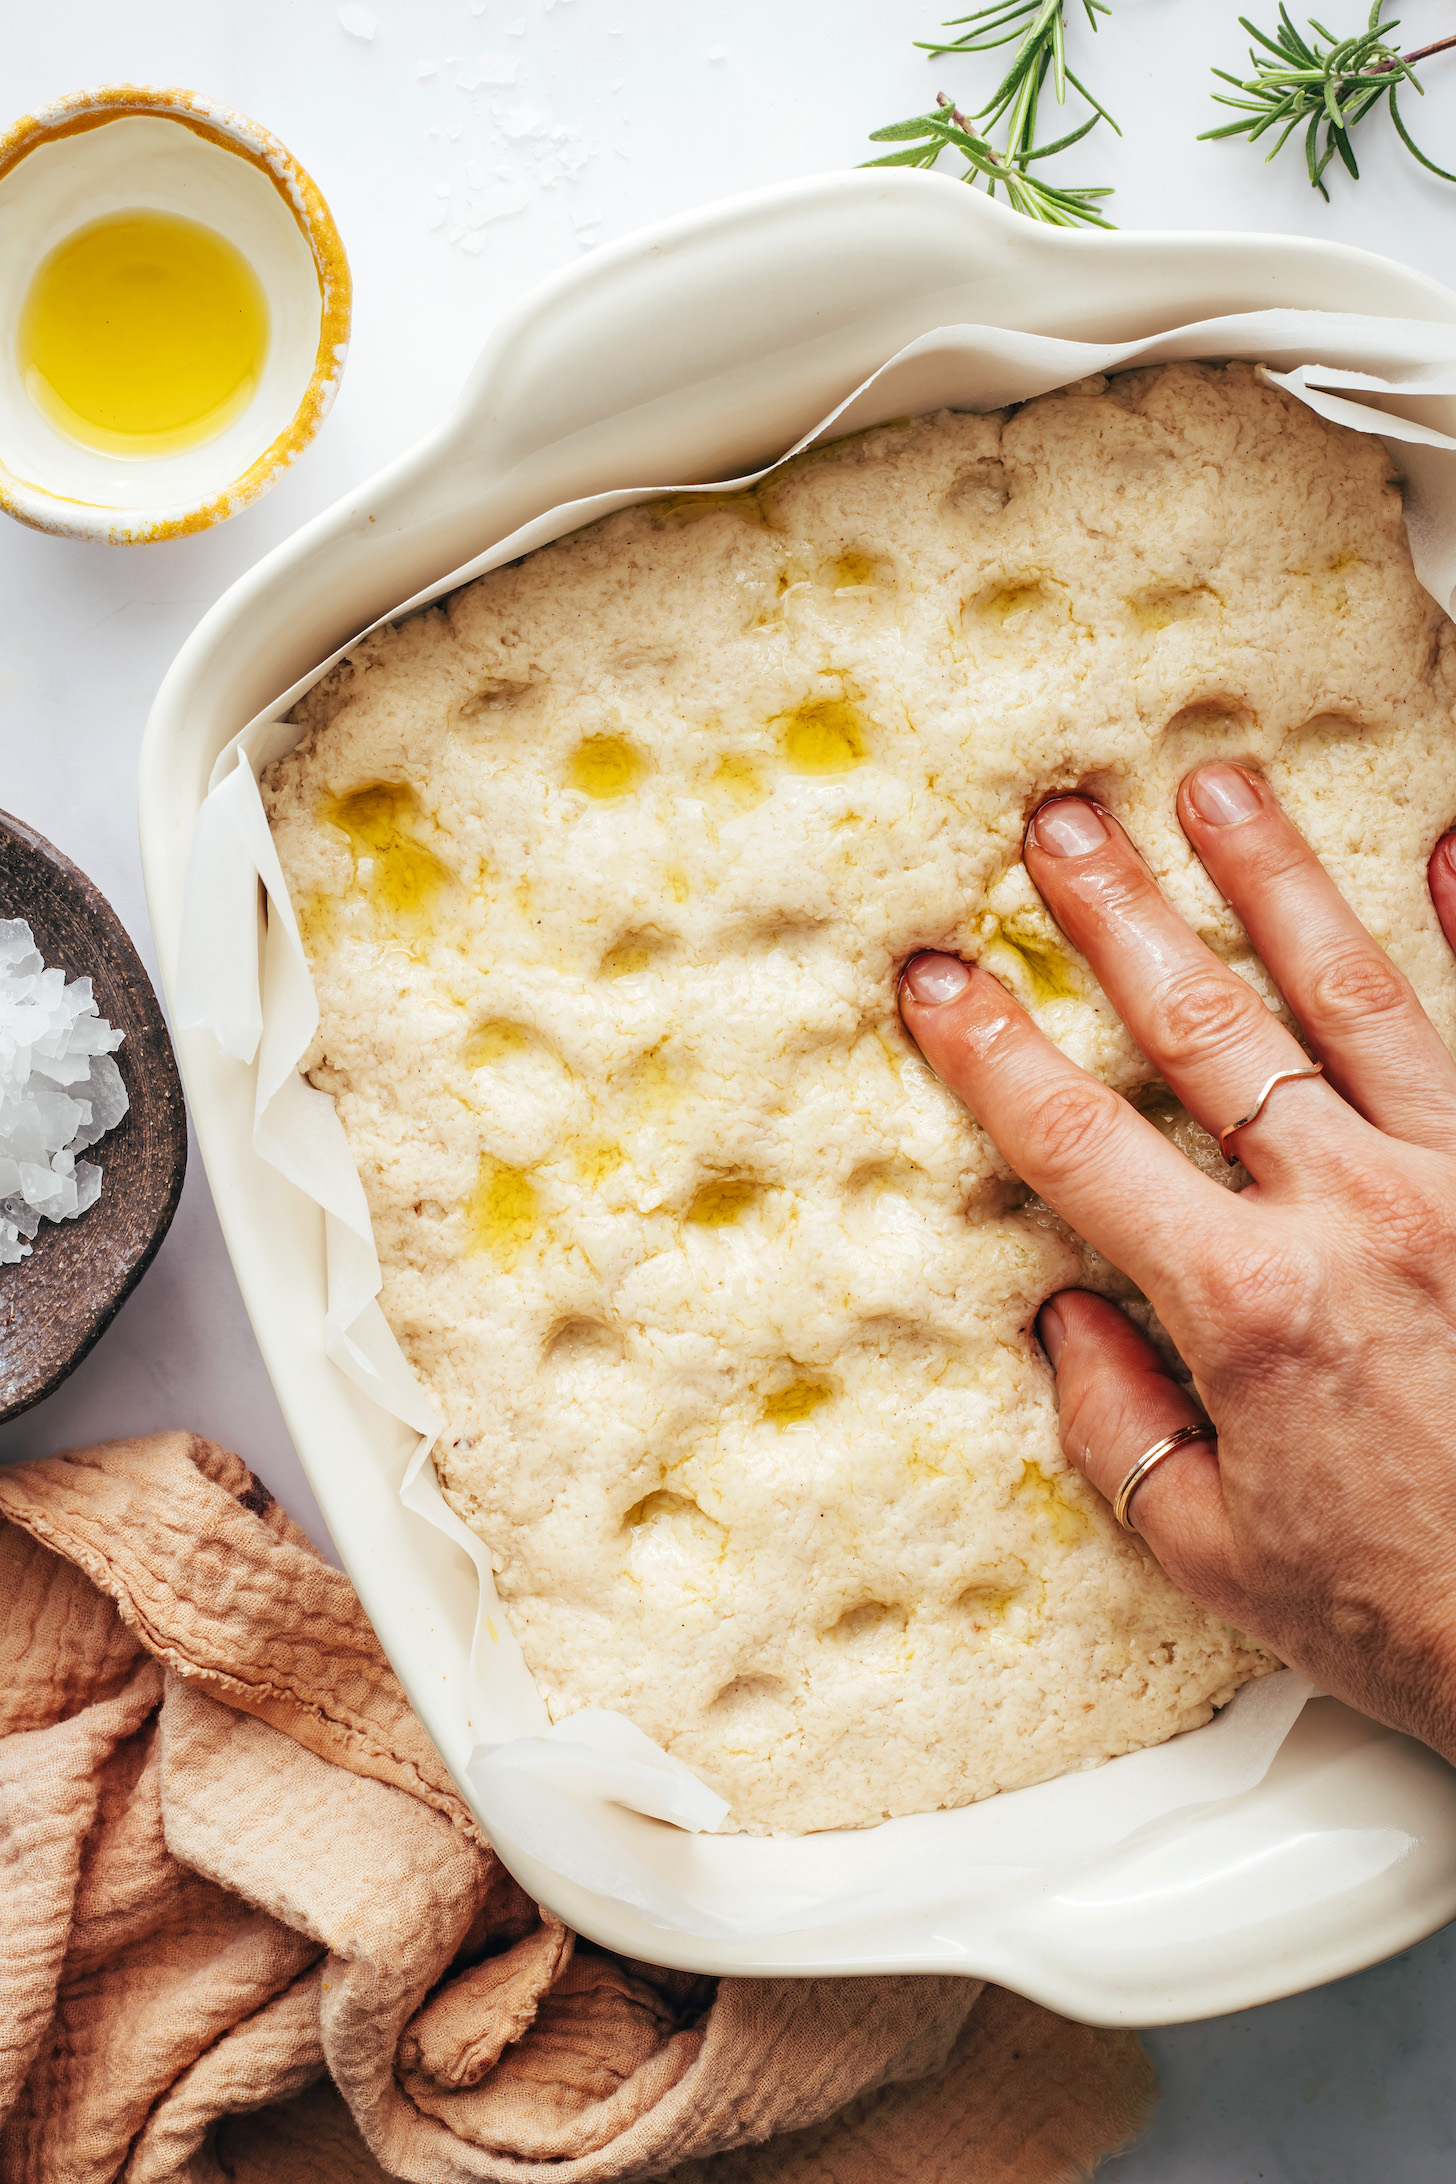 Press fingers into focaccia dough to create pockets on top